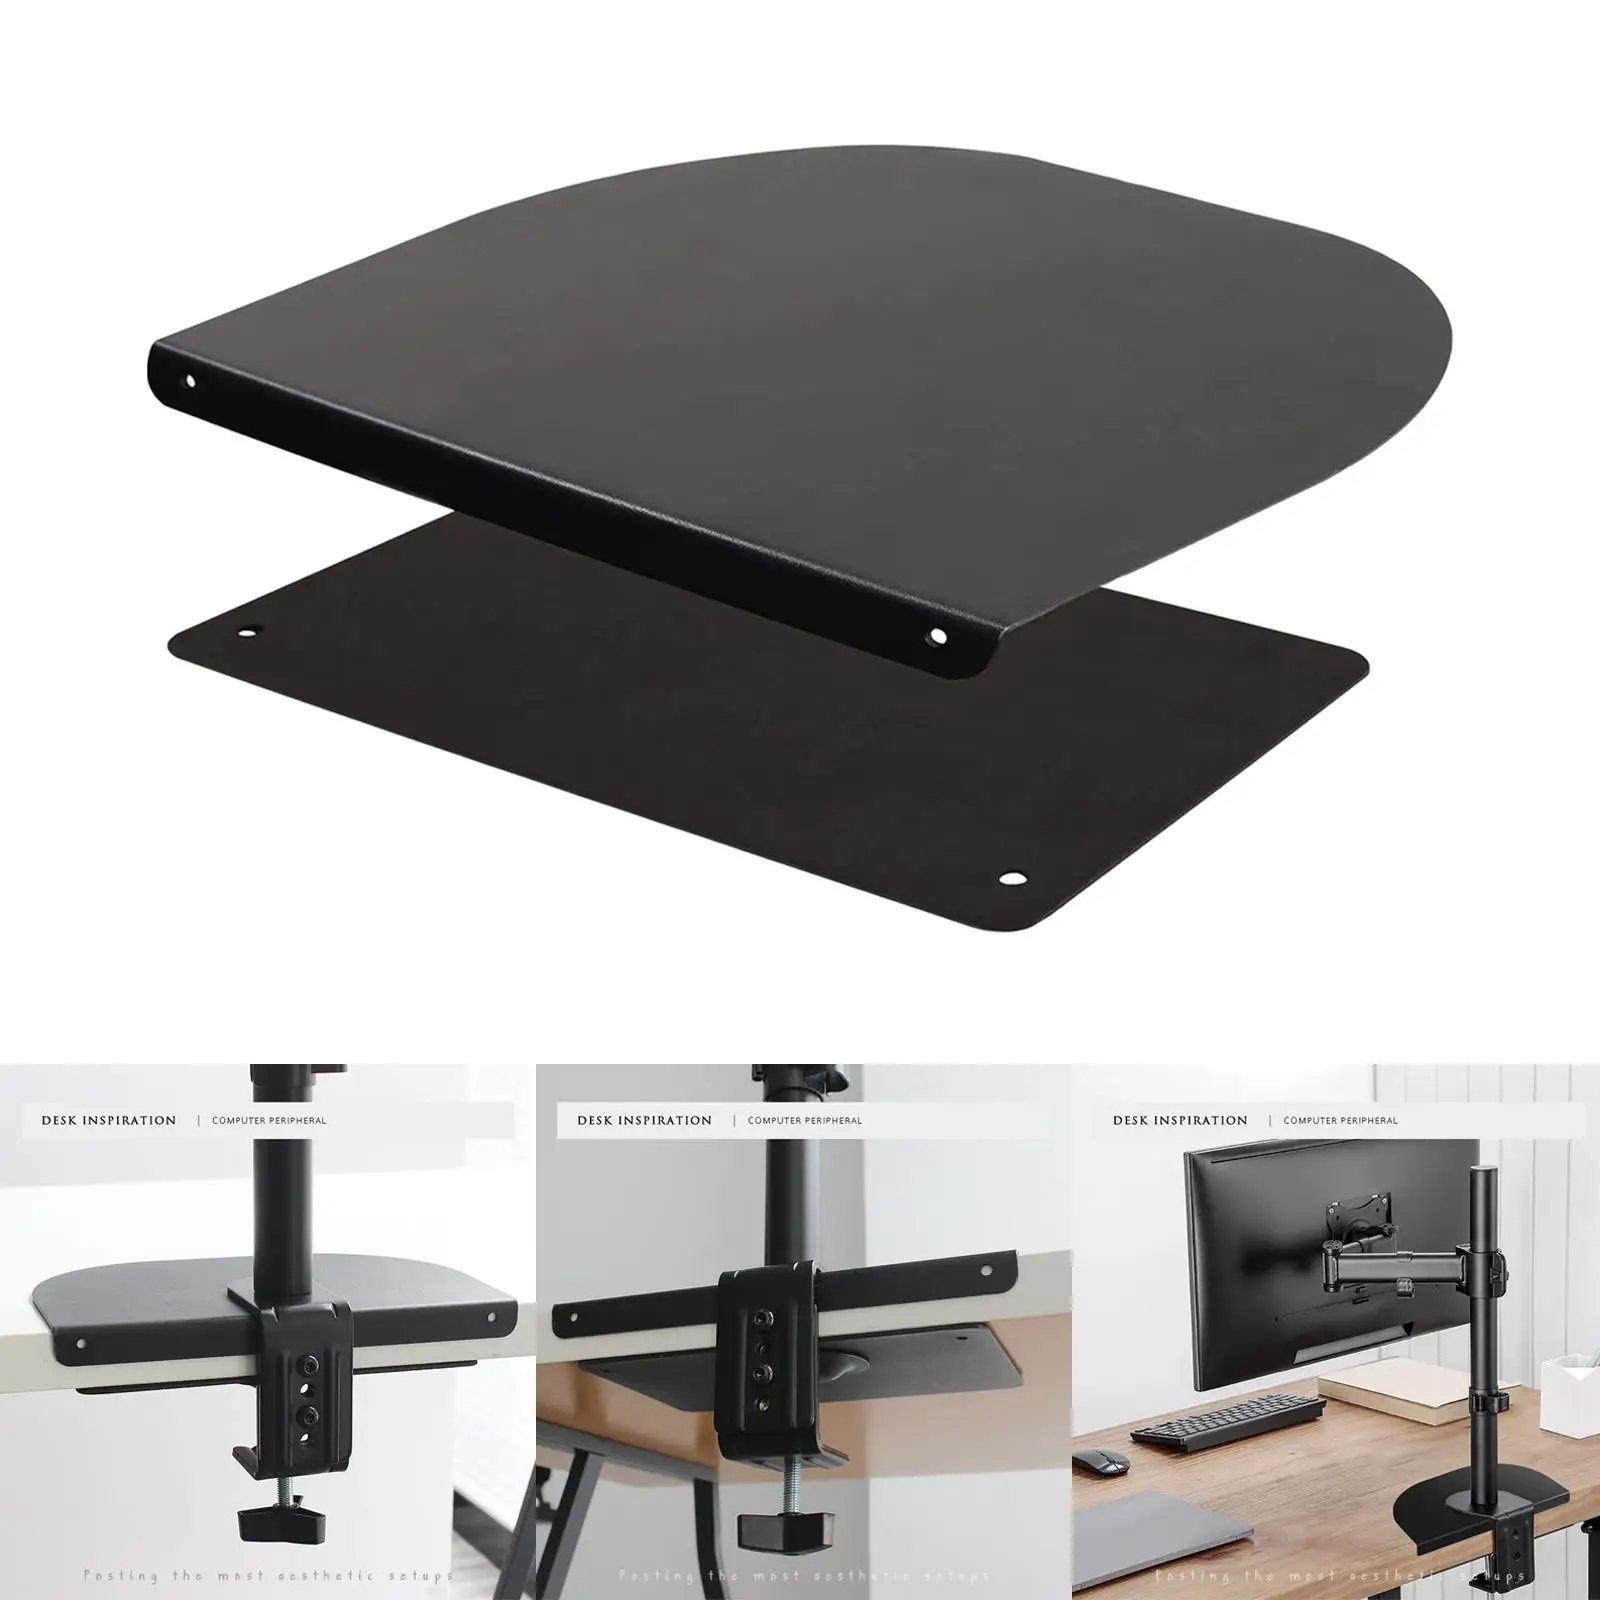 Monitor Reinforcement Steel Mount Plate Protect Desk Easily Install Fits Most Clamp Anti Slip Pads Solid black